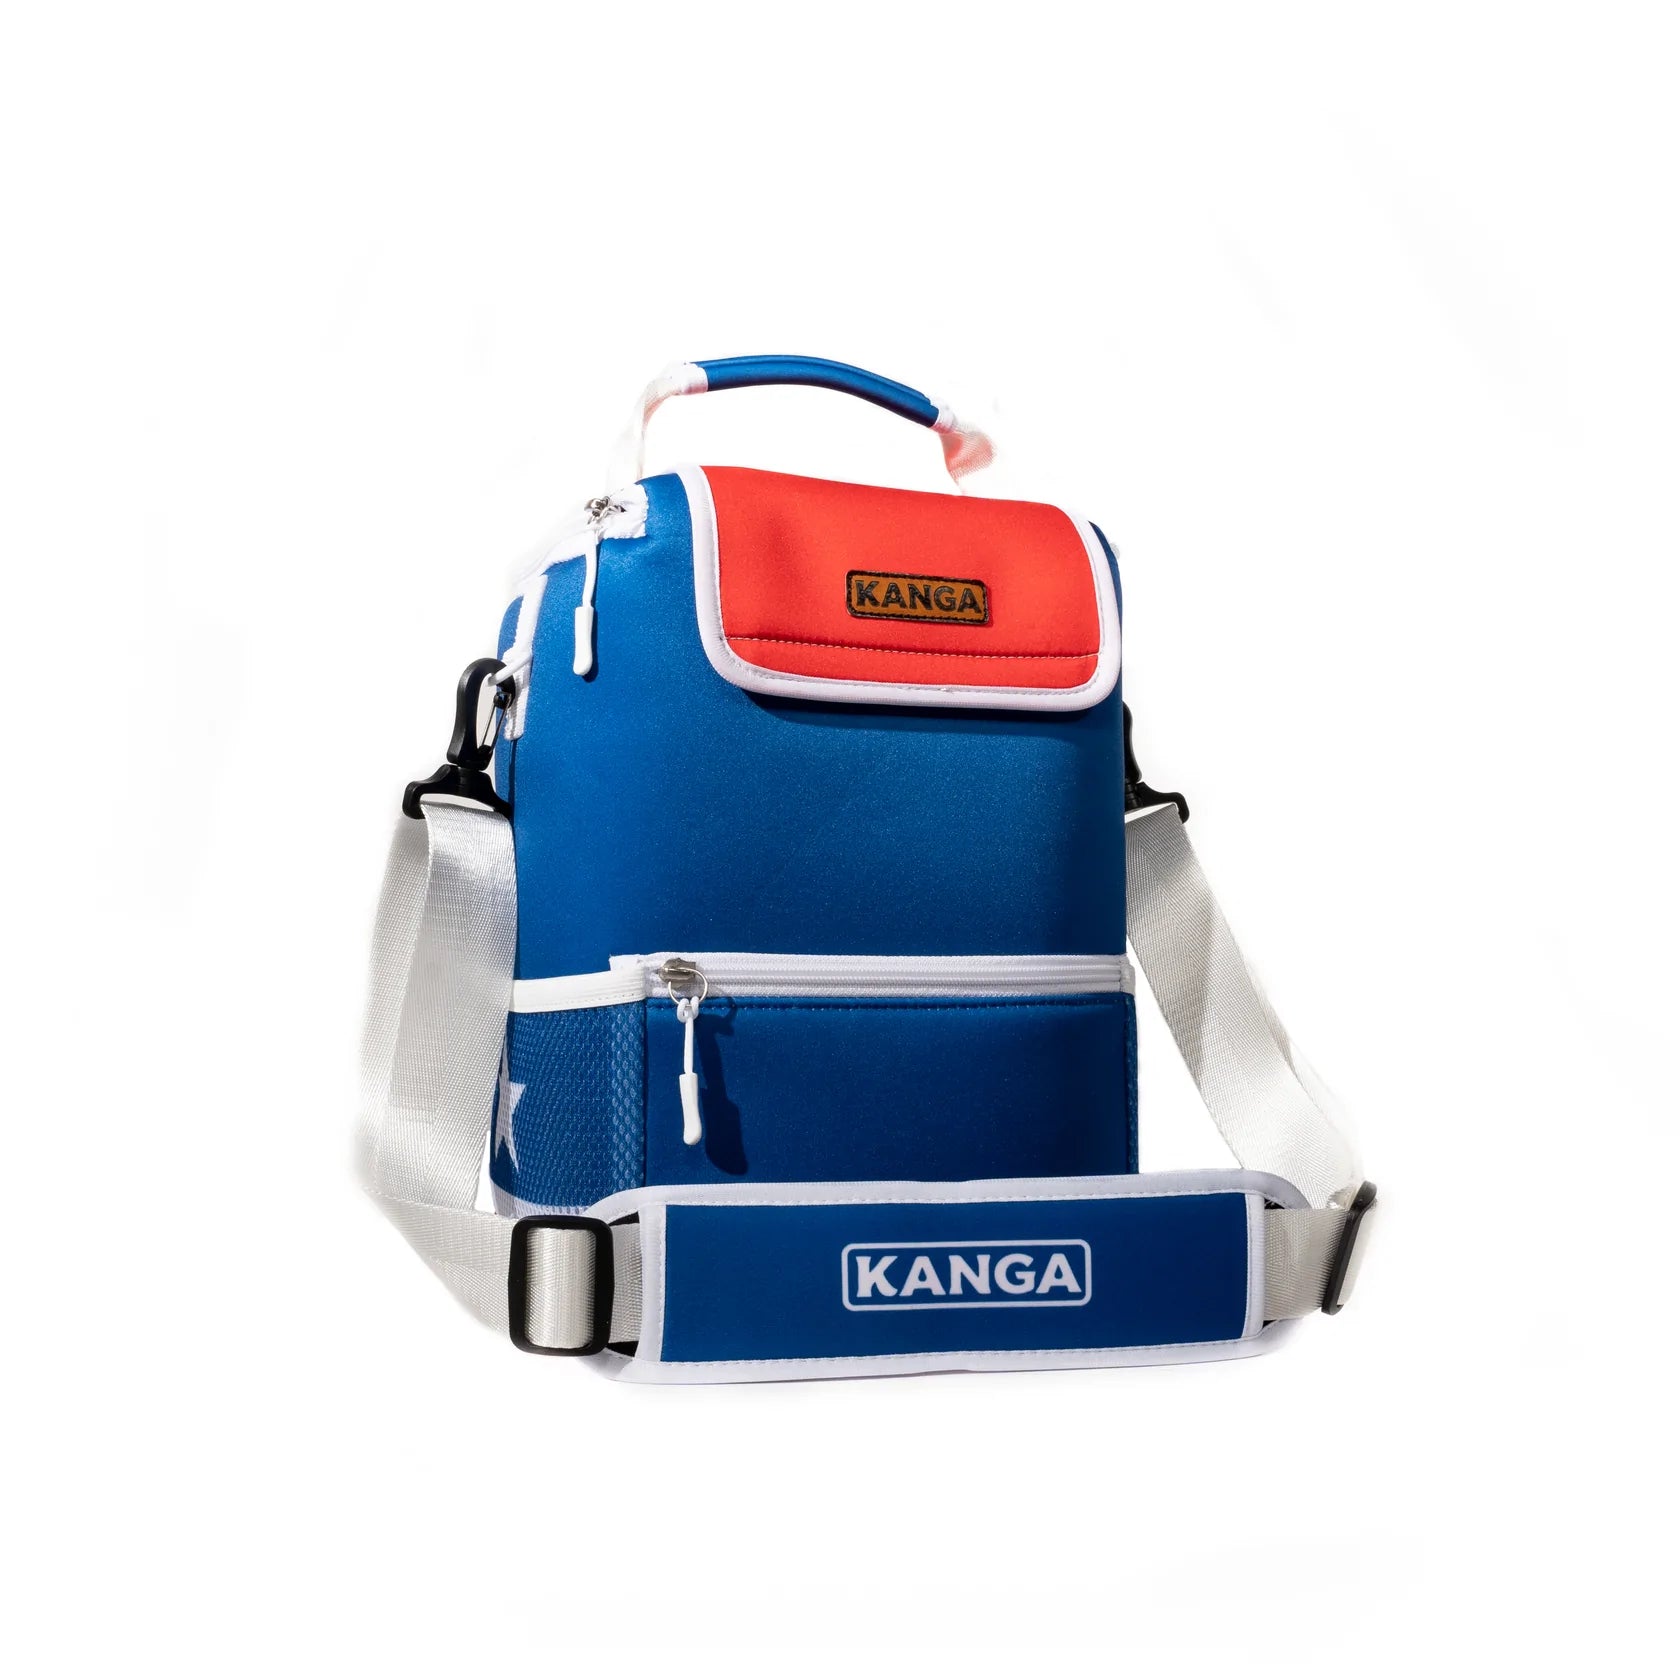 The Kanga Cooler Pouch